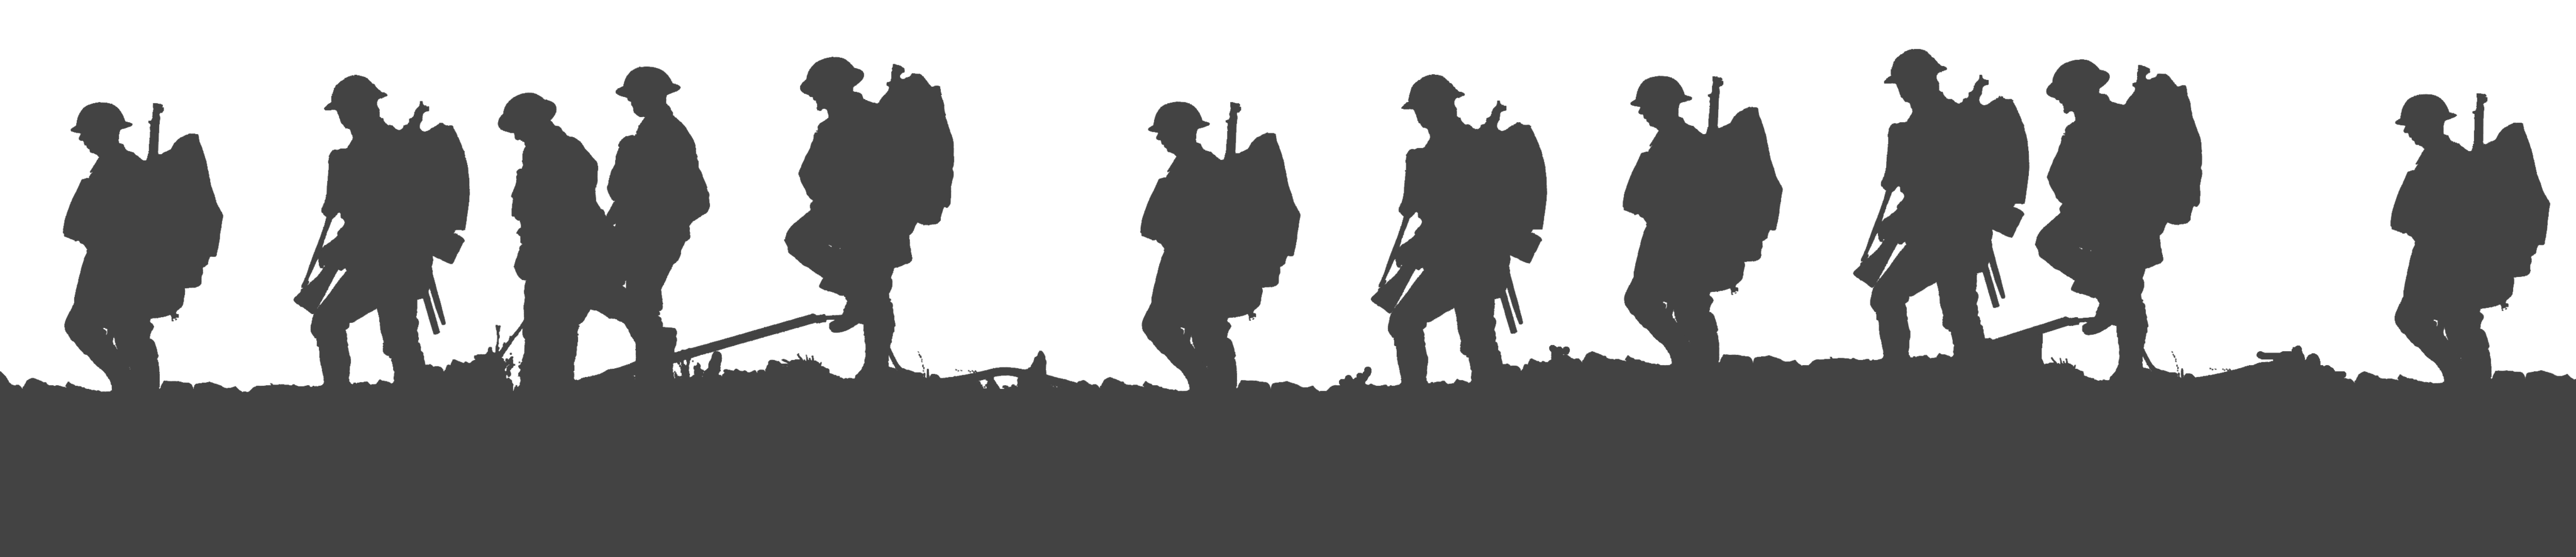 lest-we-forget-first-world-war-soldier-silhouette-military-soldiers